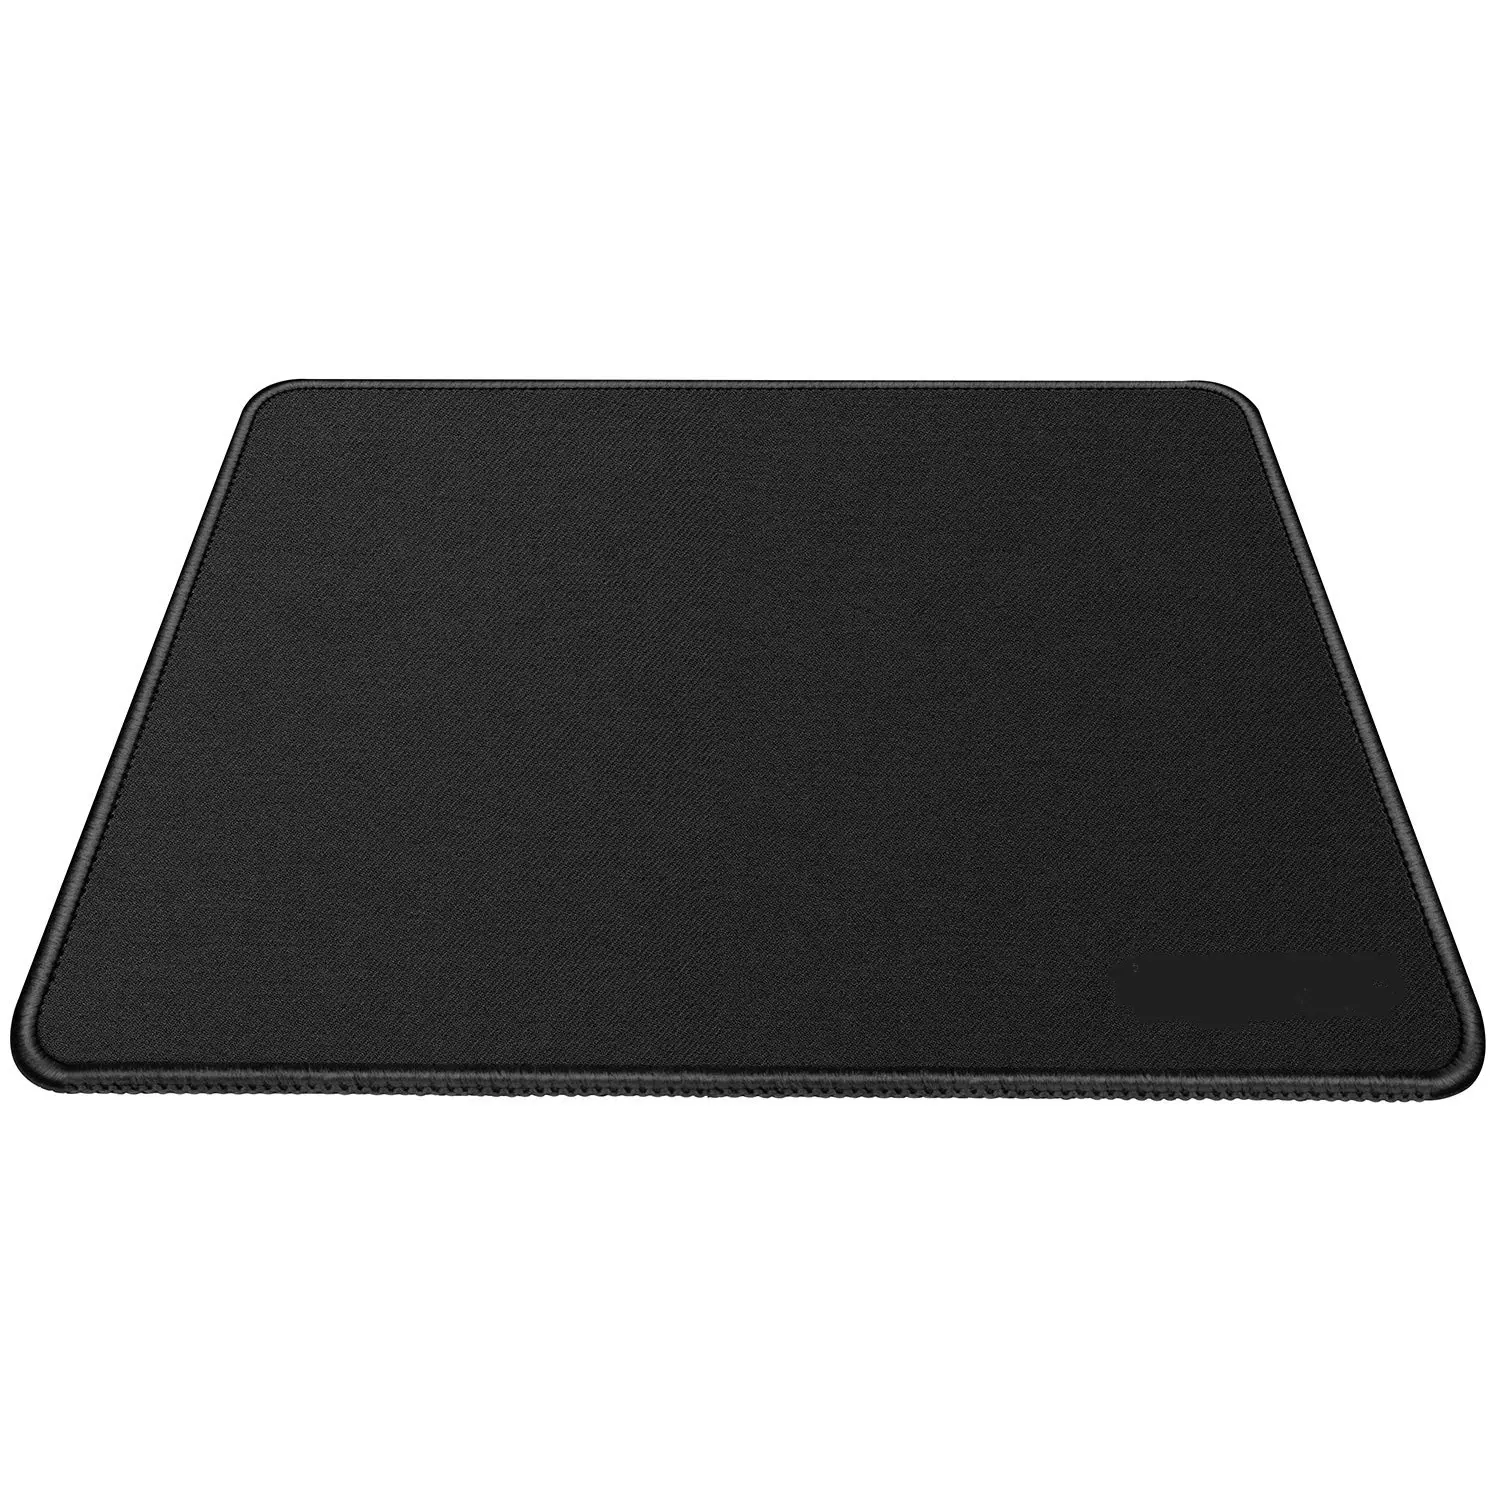 Large Computer Customizable Pad Office Table Mat Non-slip Odorless Increase Colorful for Computer Laptop Shirt Mouse Pad